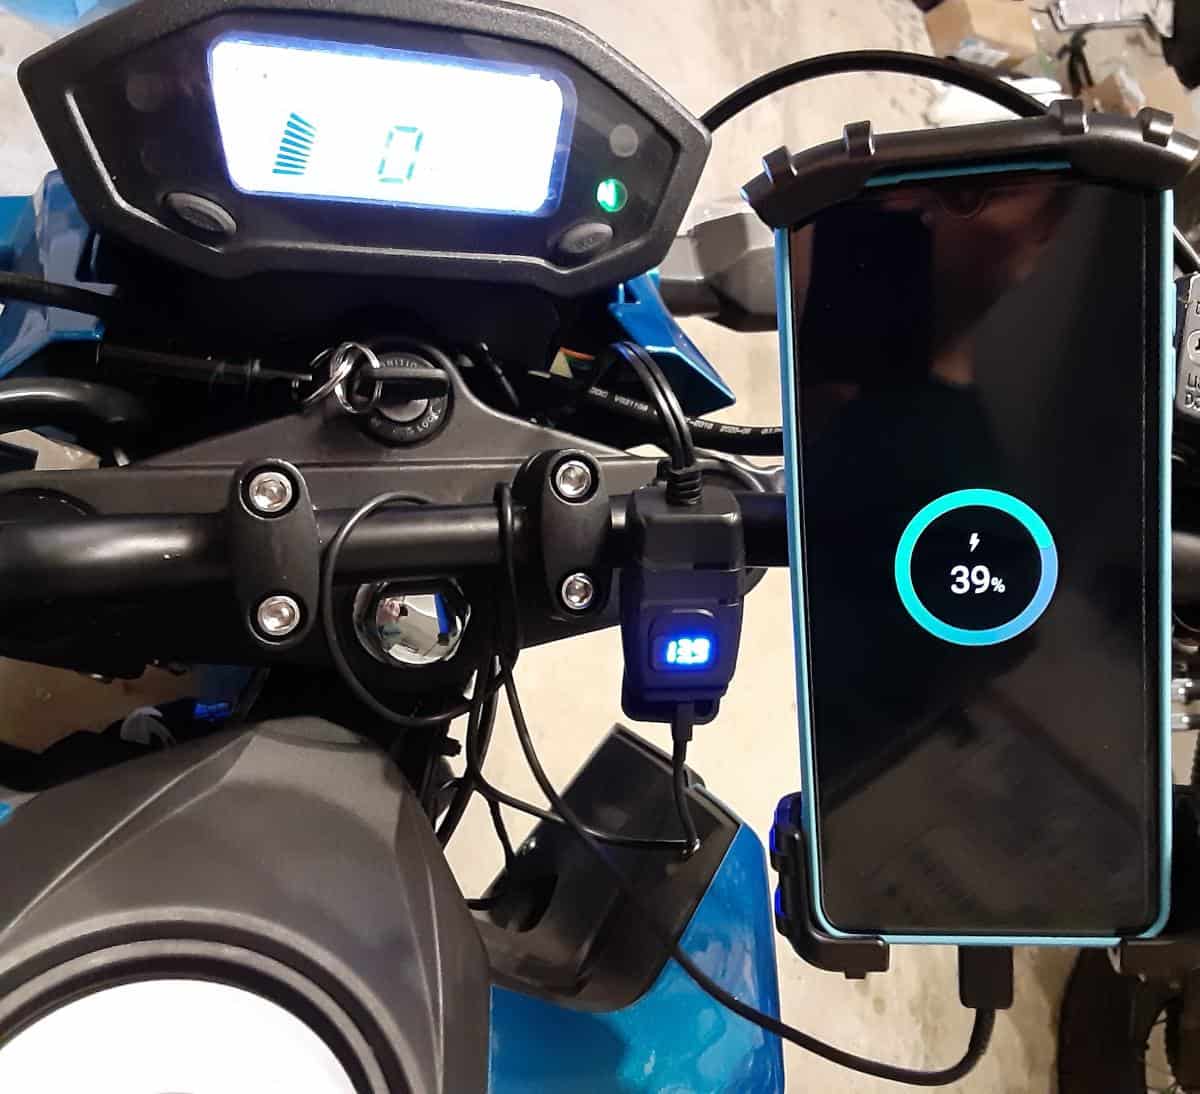 My Boom Vader motorcycle usb cellphone charger.  Charging my phone.